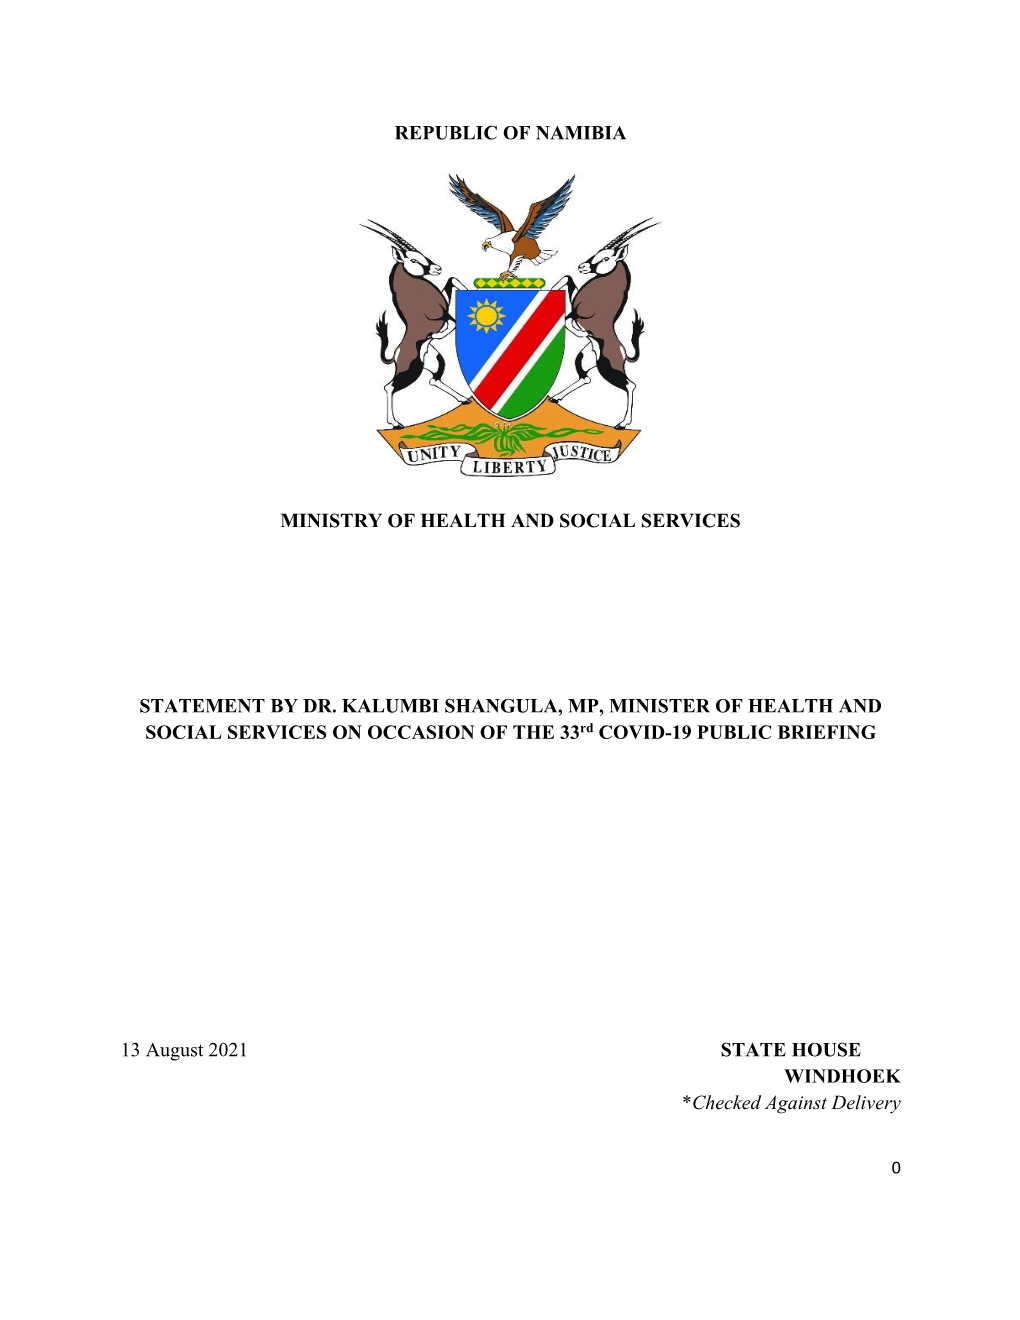 Republic of Namibia Ministry of Health and Social